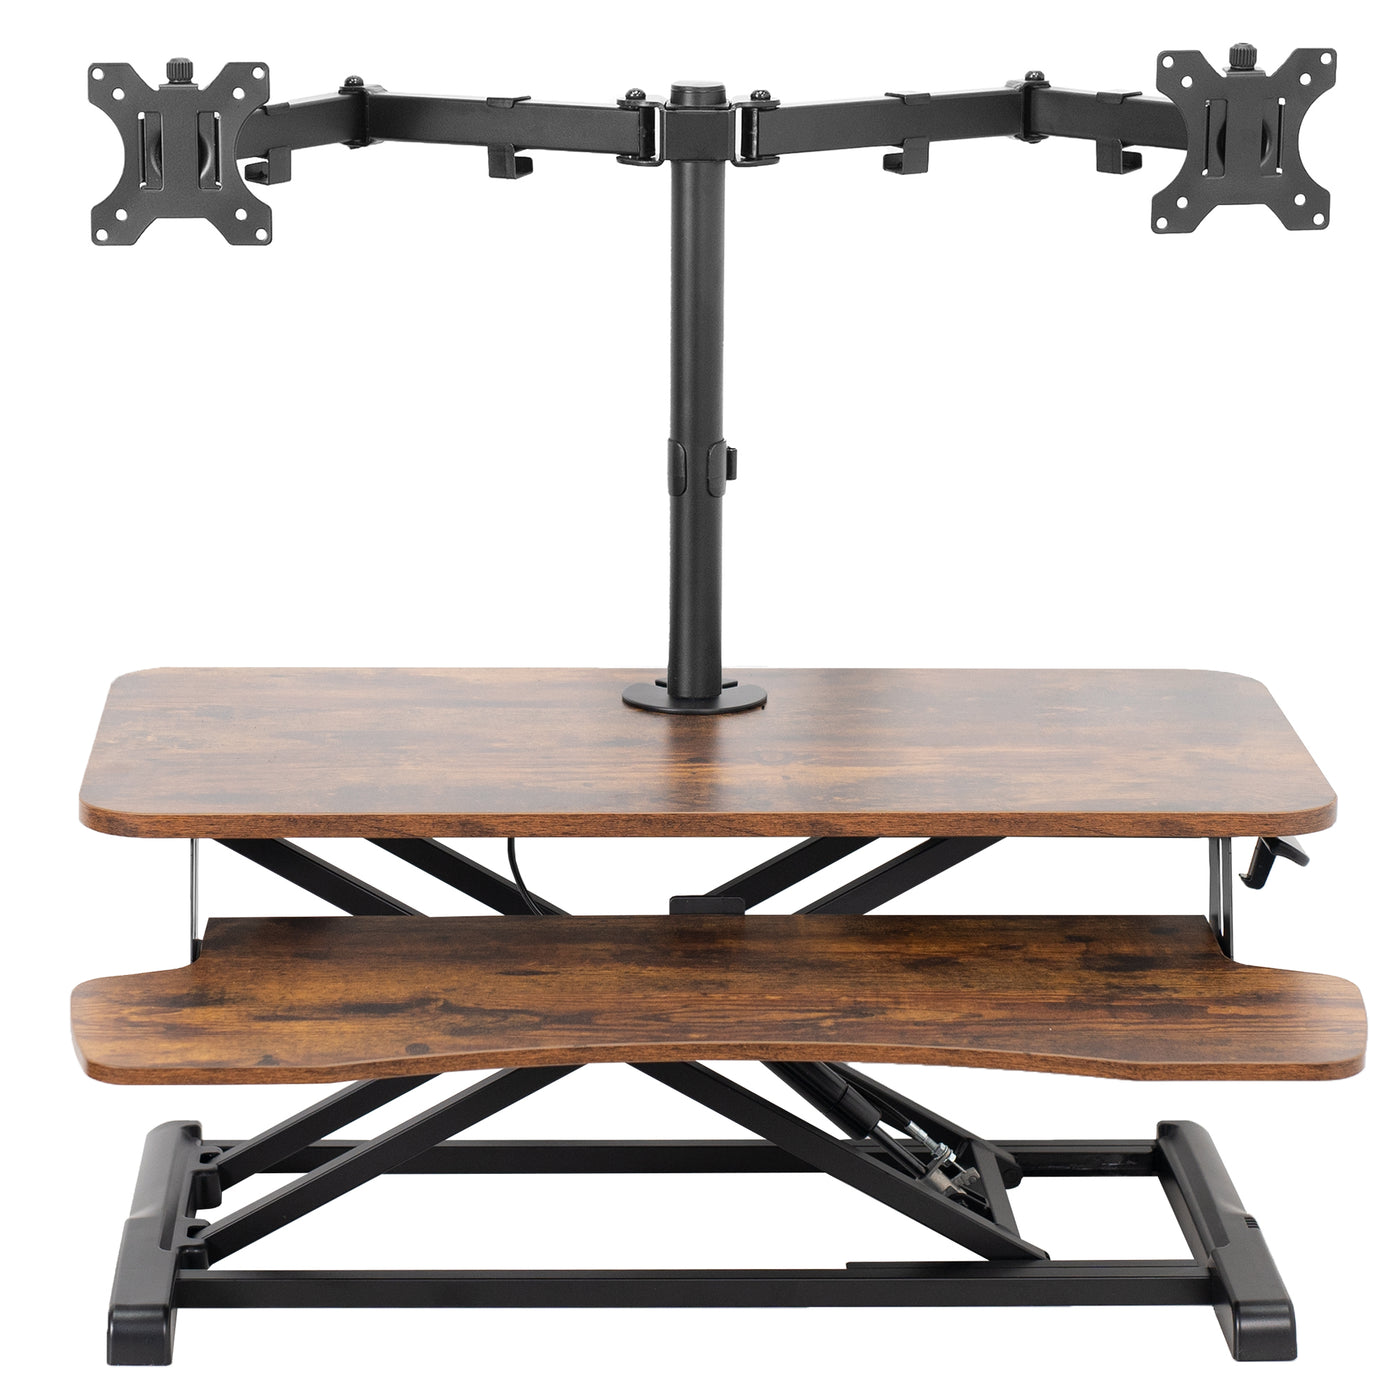 Rustic, sturdy height adjustable desk converter with articulating dual monitor mount.